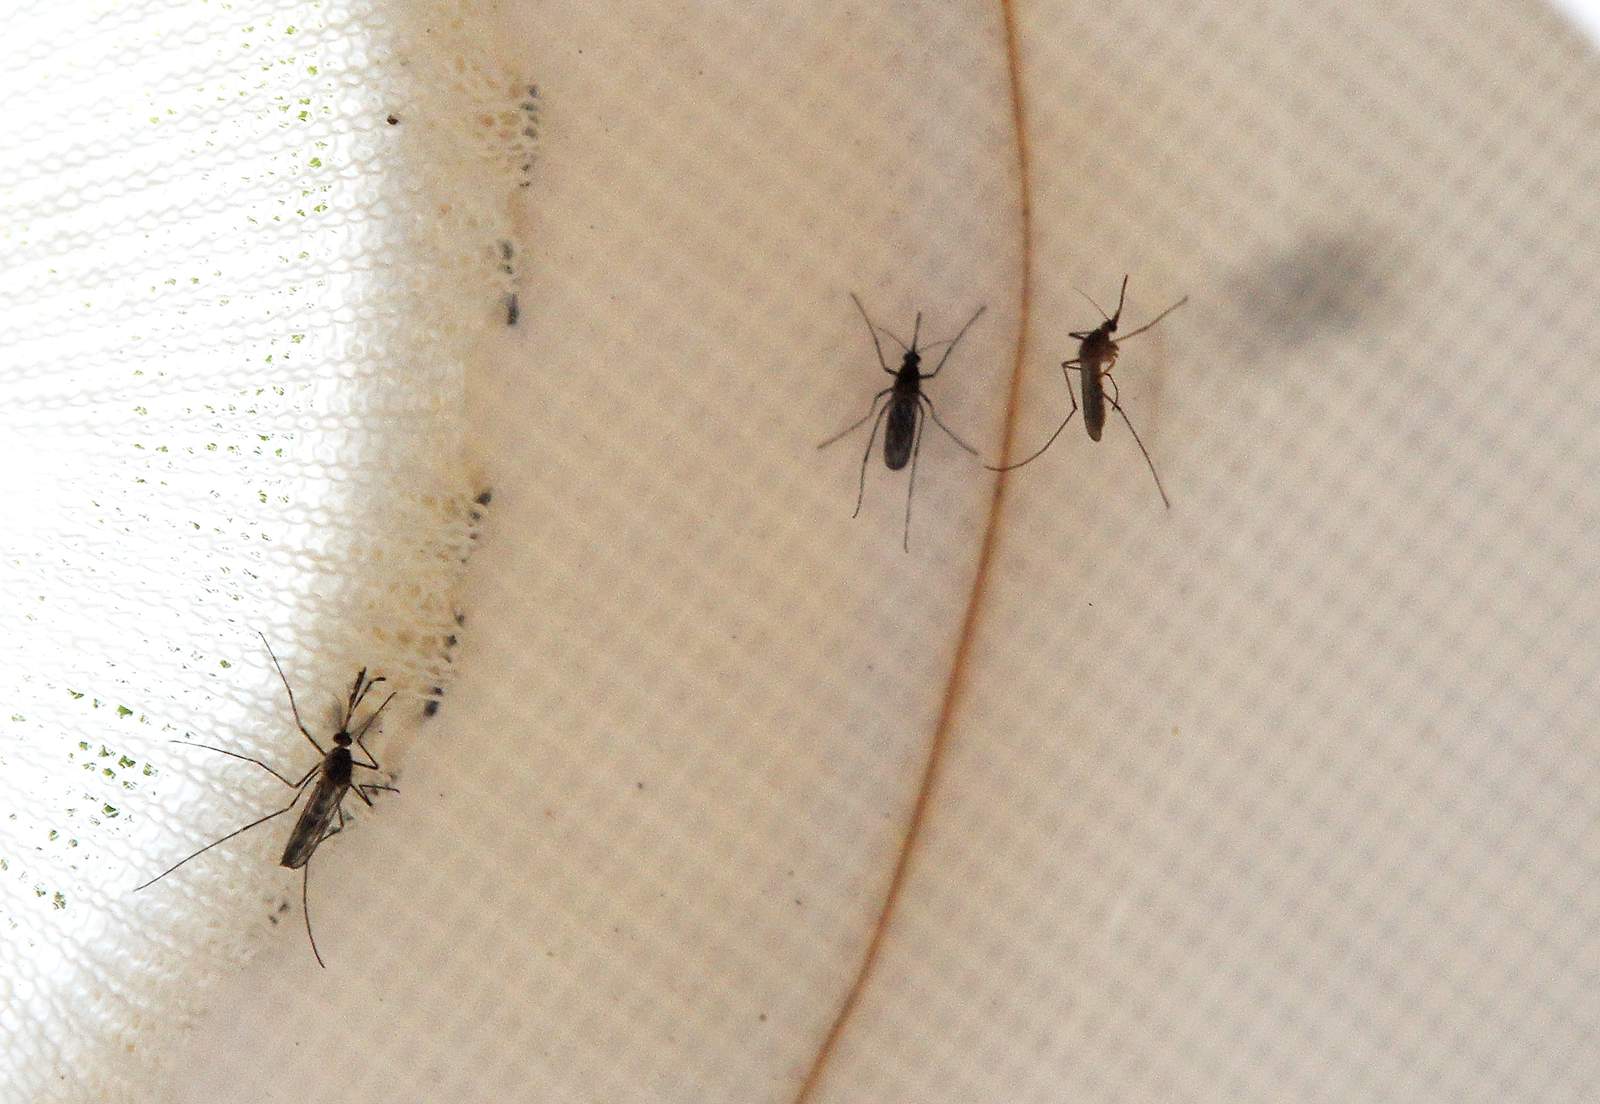 West Nile virus confirmed in Duval County